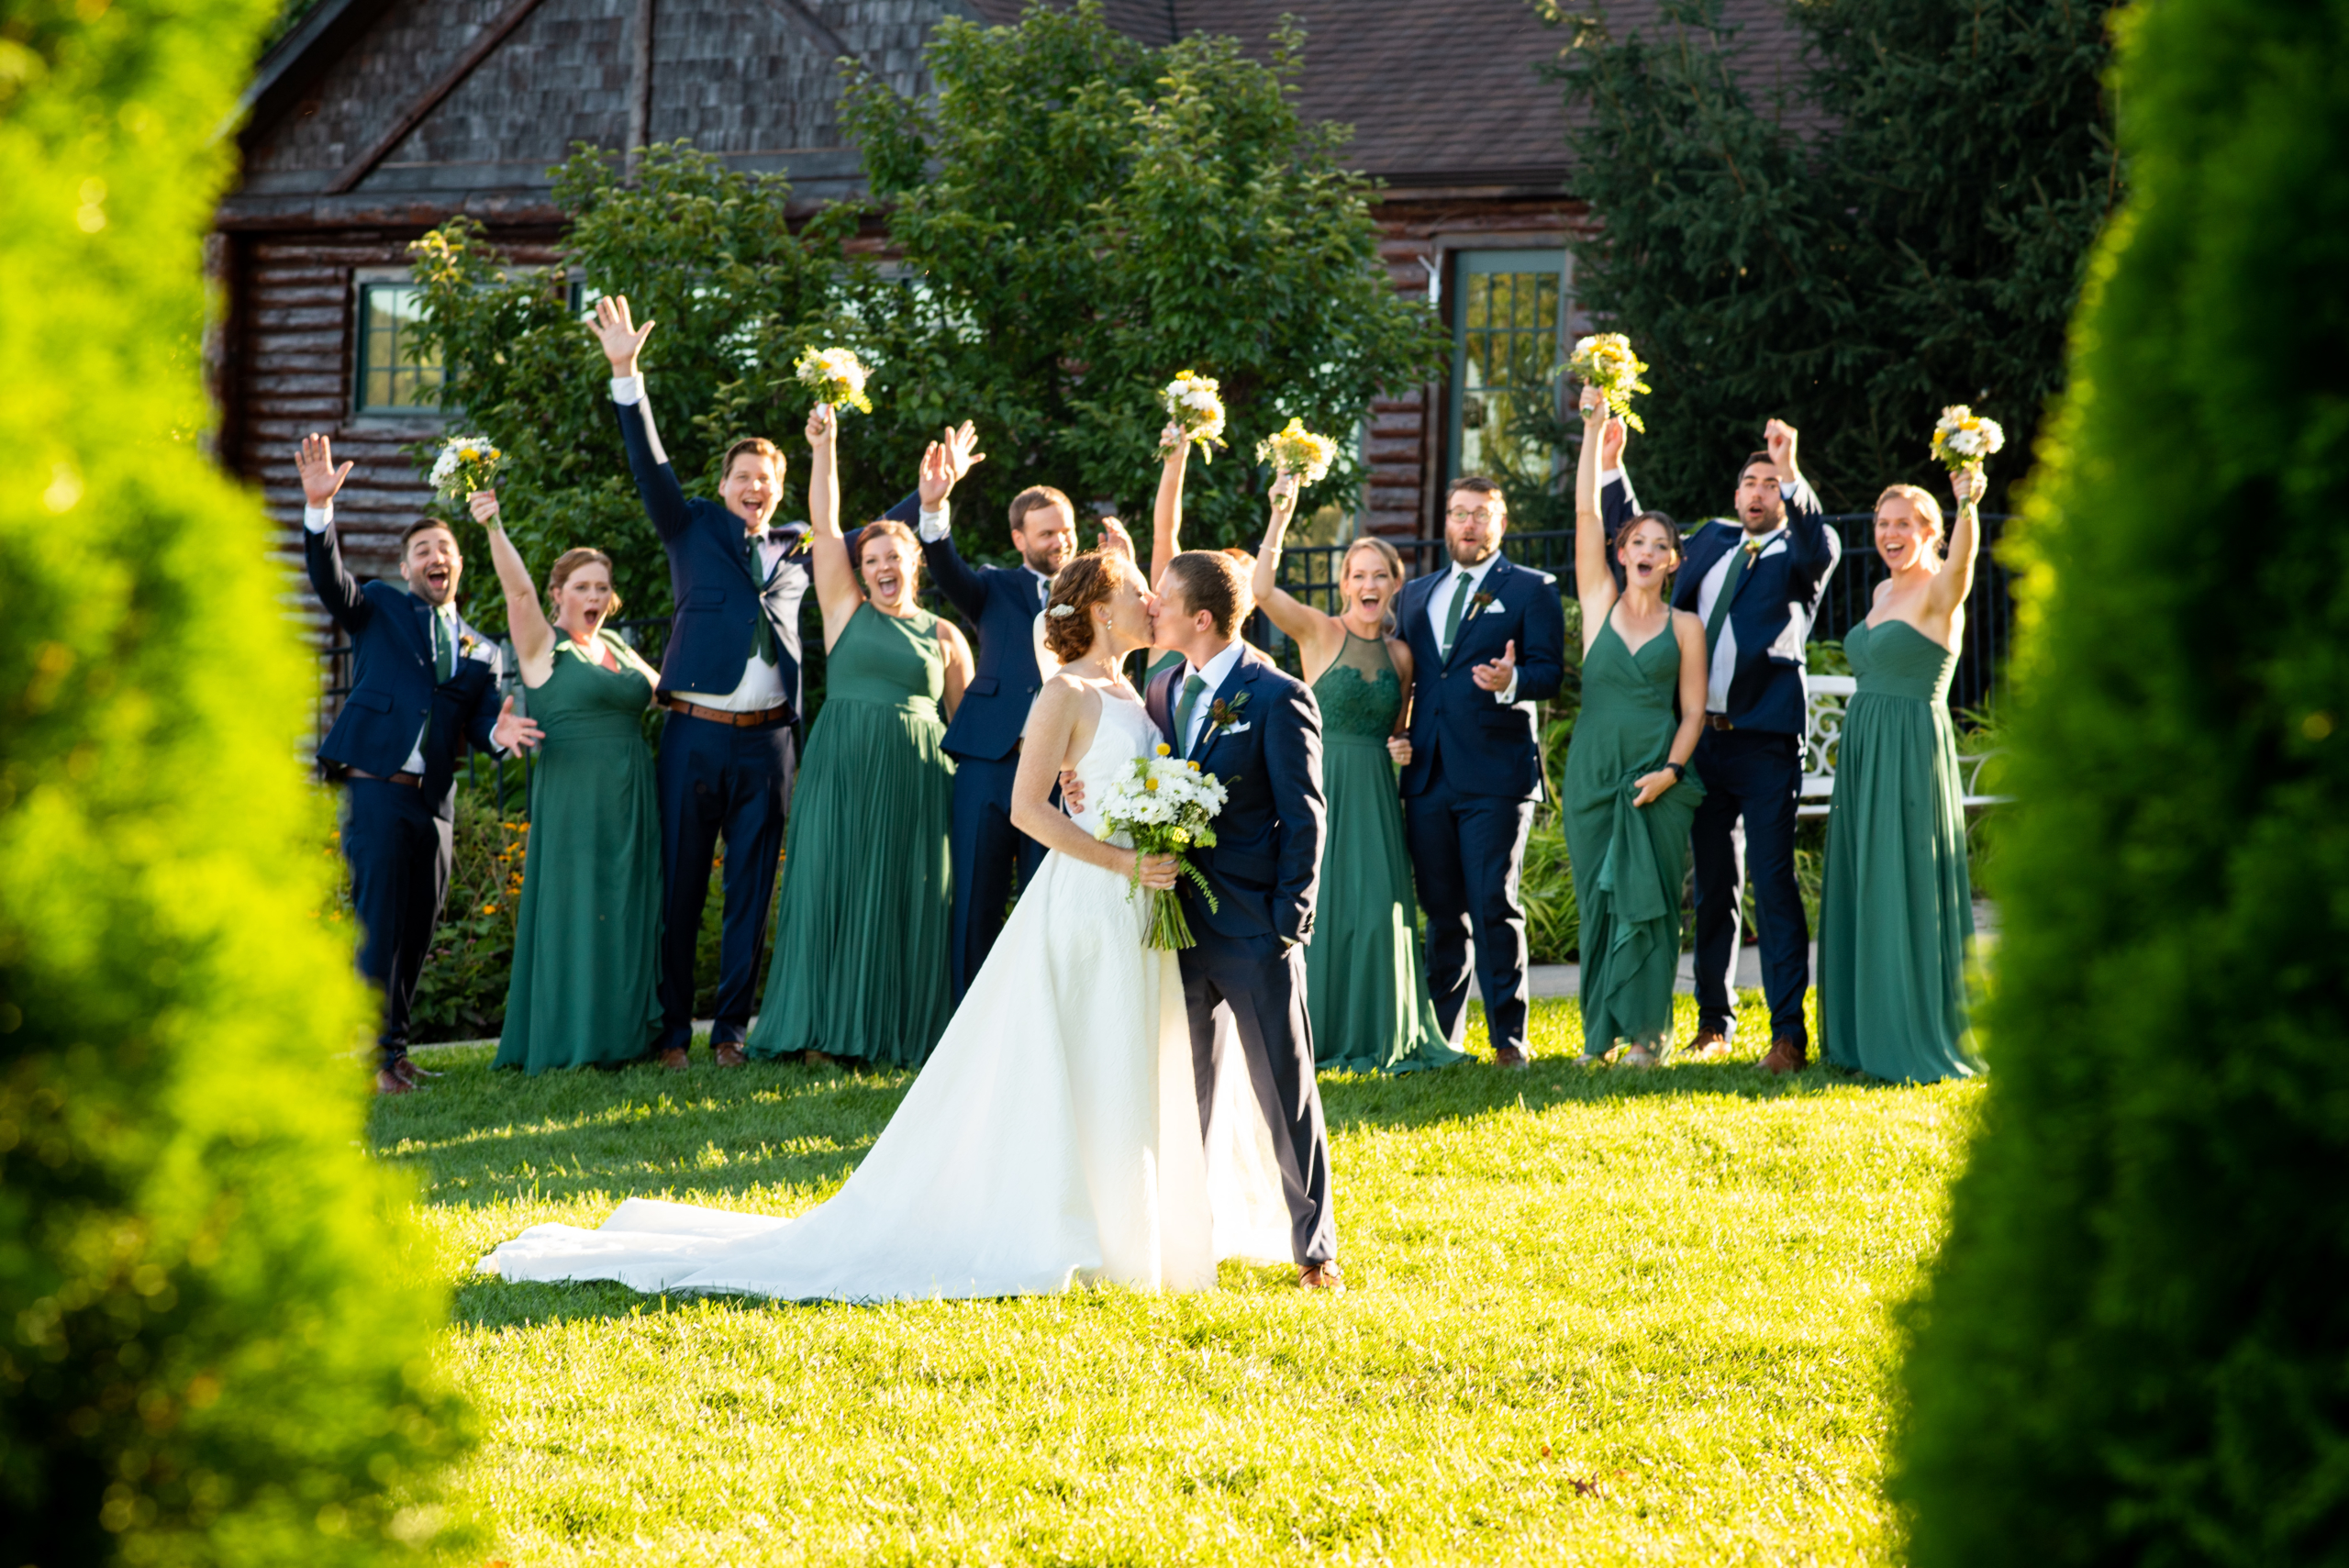 Bride and Groom kissing on lawn. Wedding party cheering